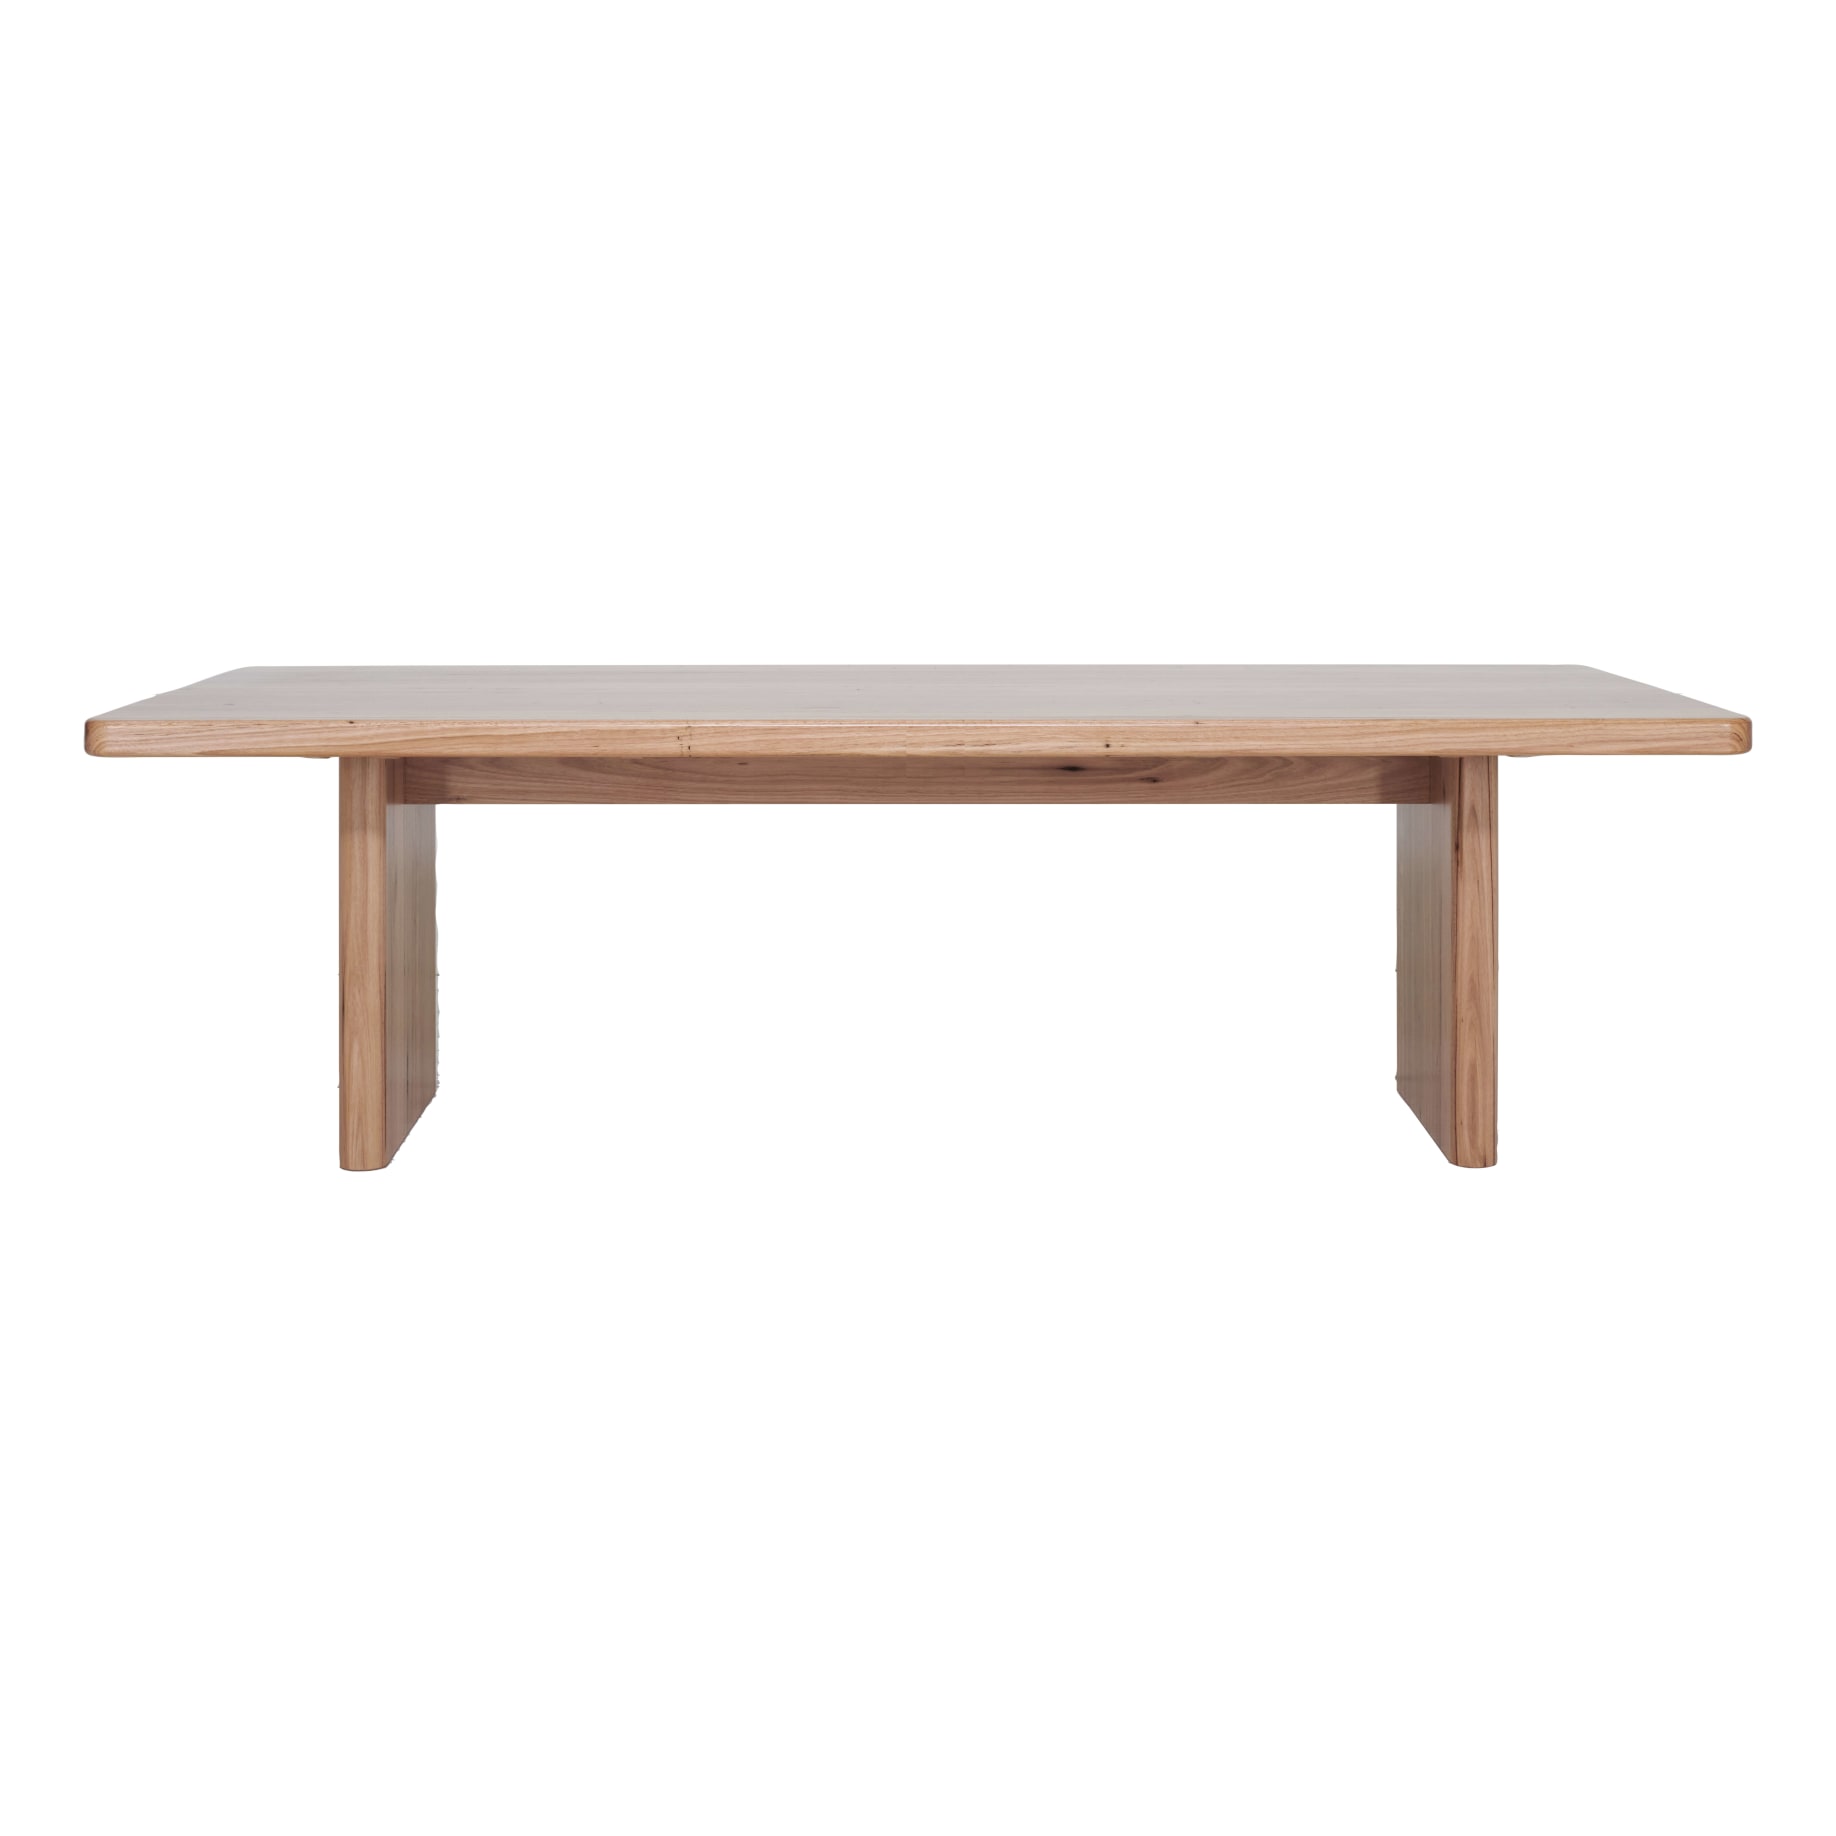 Harper Dining Table 300cm in Australian Timbers